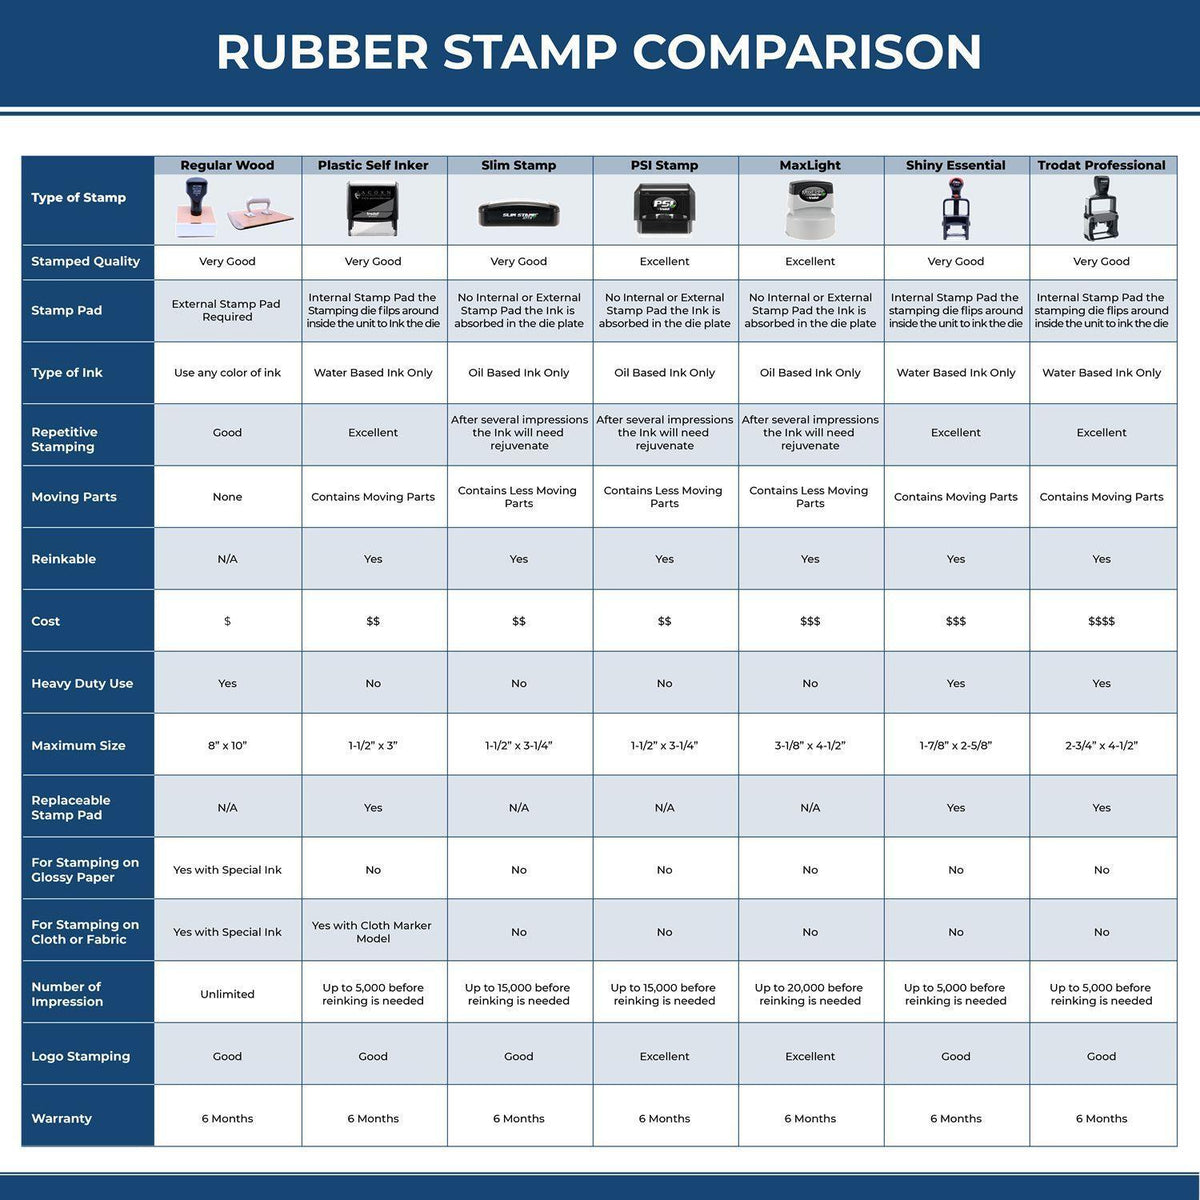 Large Pre Inked Posted Stamp 4144SLIM Rubber Stamp Comparison